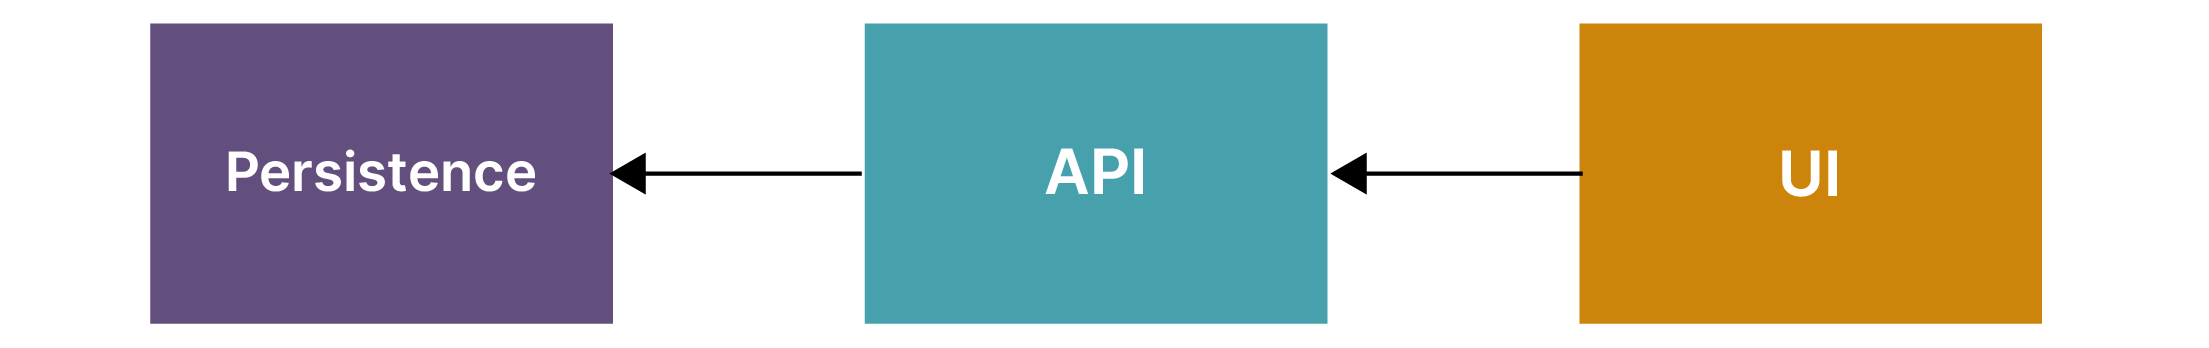 It is important to pay attention to the interactions between the various parts of an application in continuous delivery, from persistence, to API, to UI.